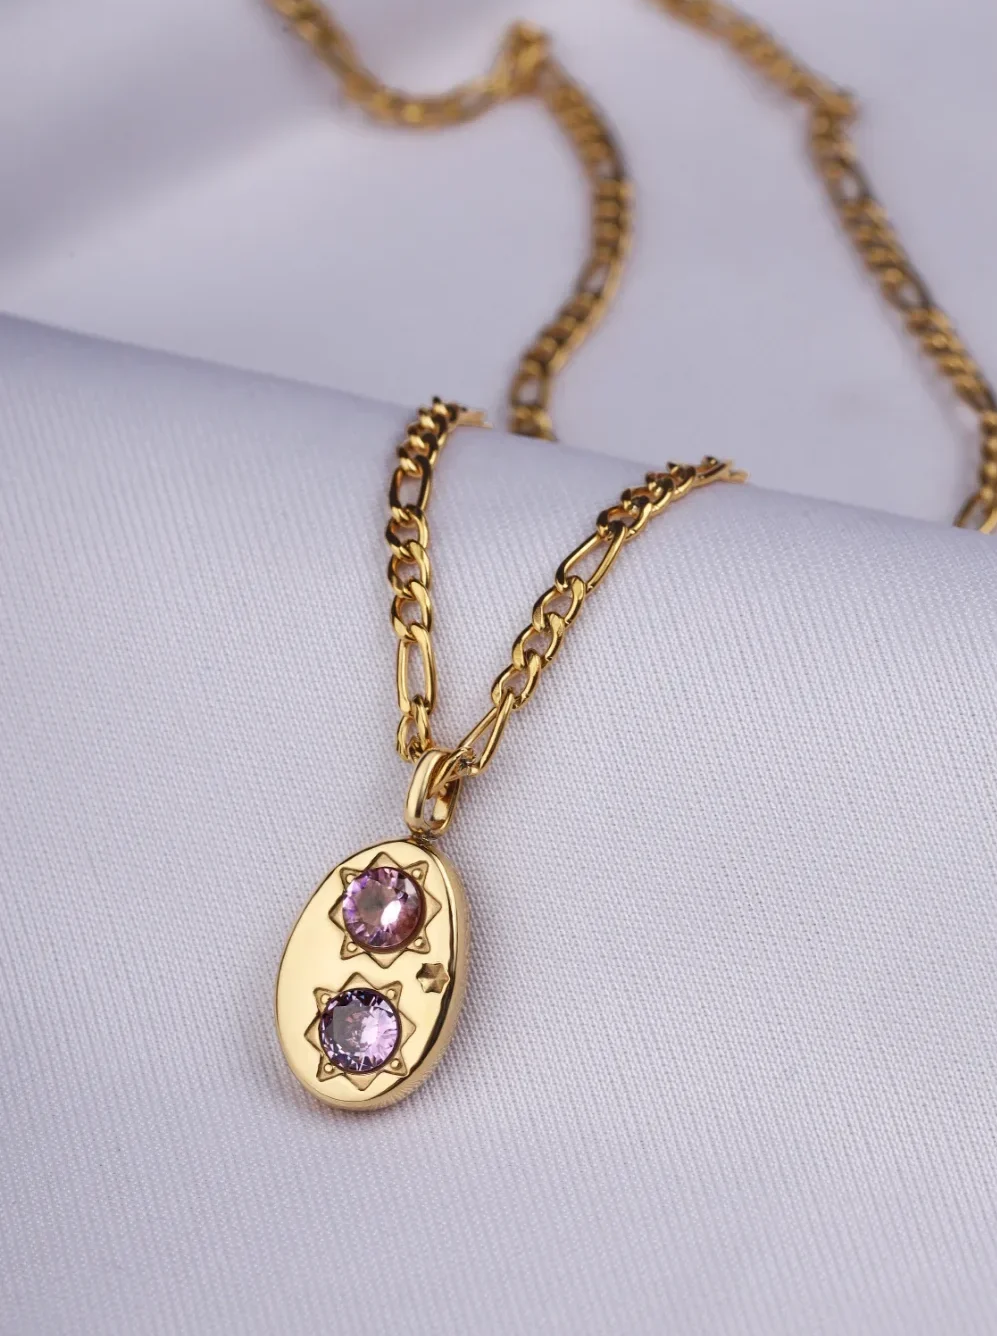 a gold necklace with a pendant and purple stones